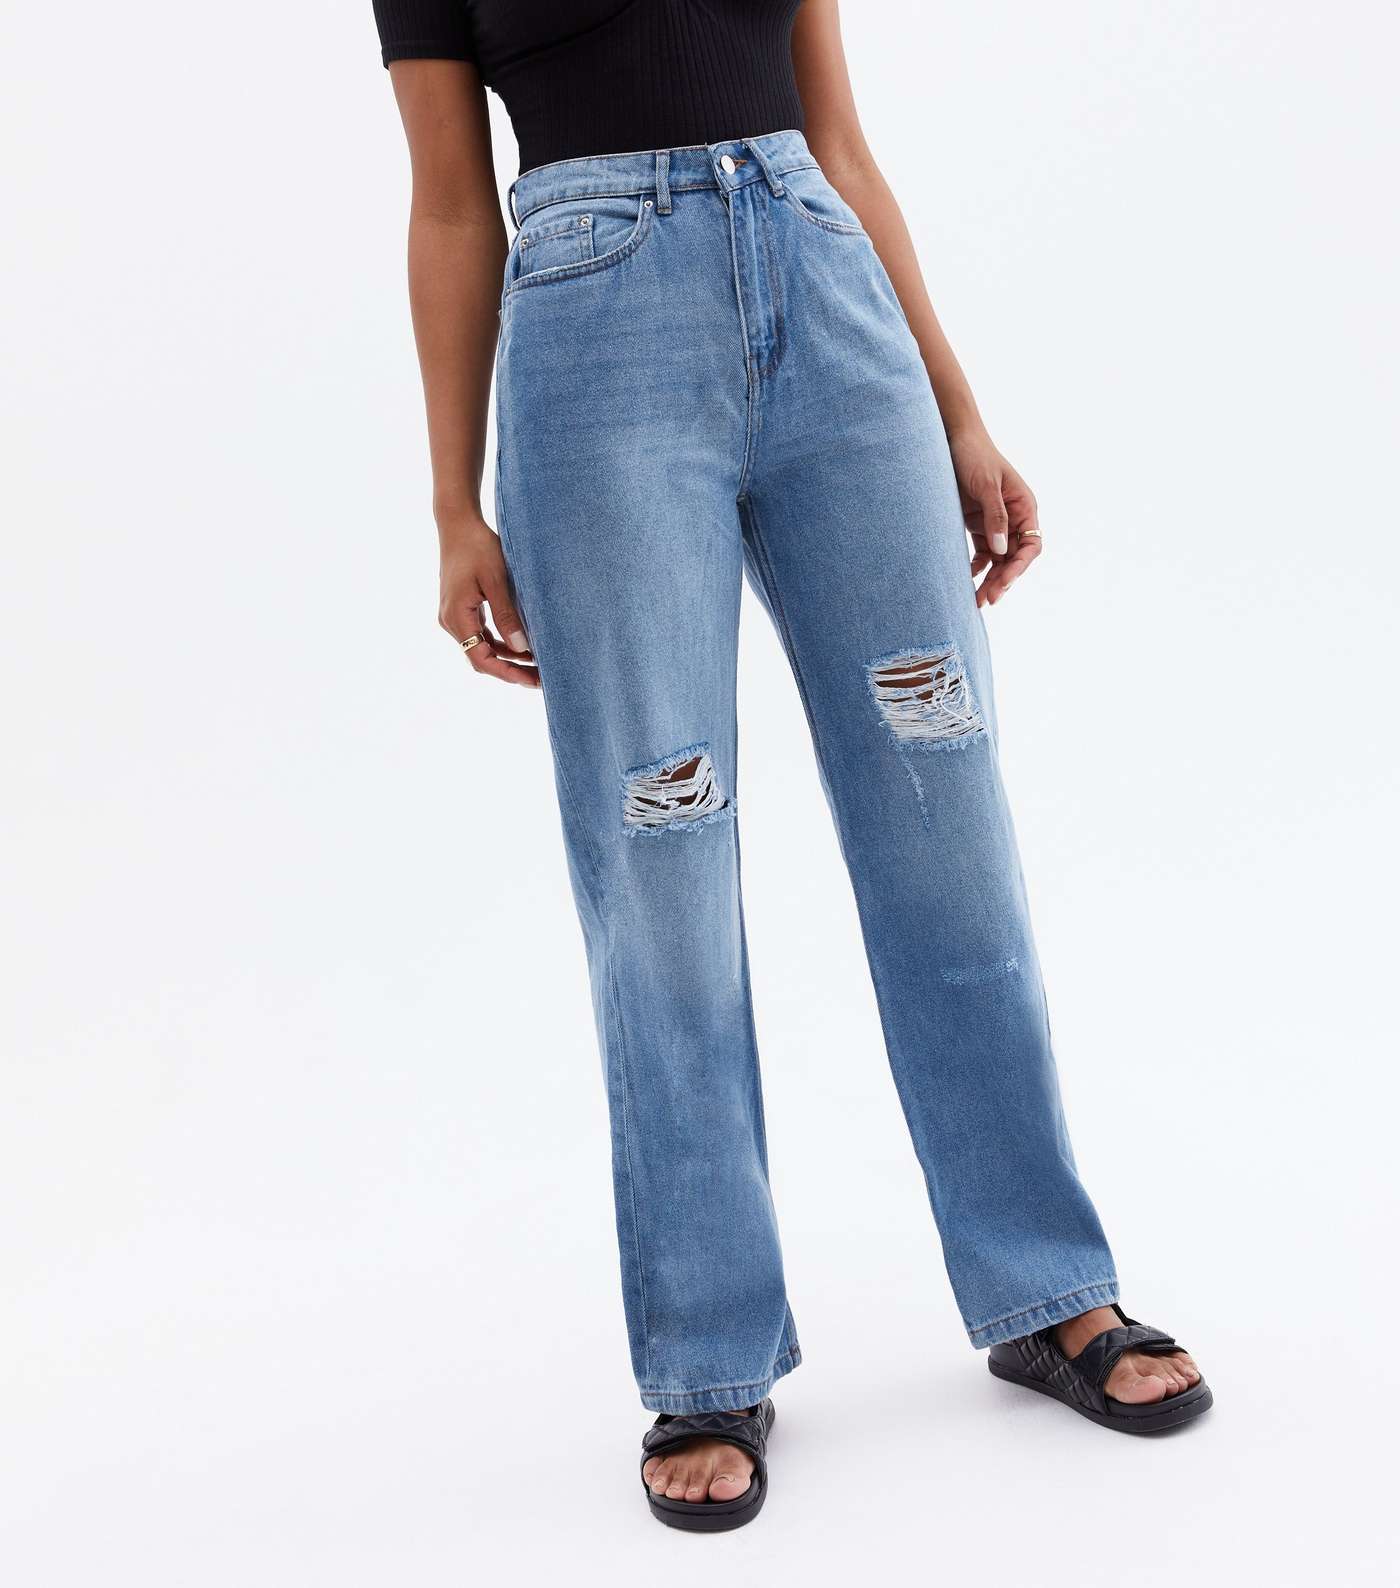 Urban Bliss Blue Ripped Wide Leg Jeans Image 2